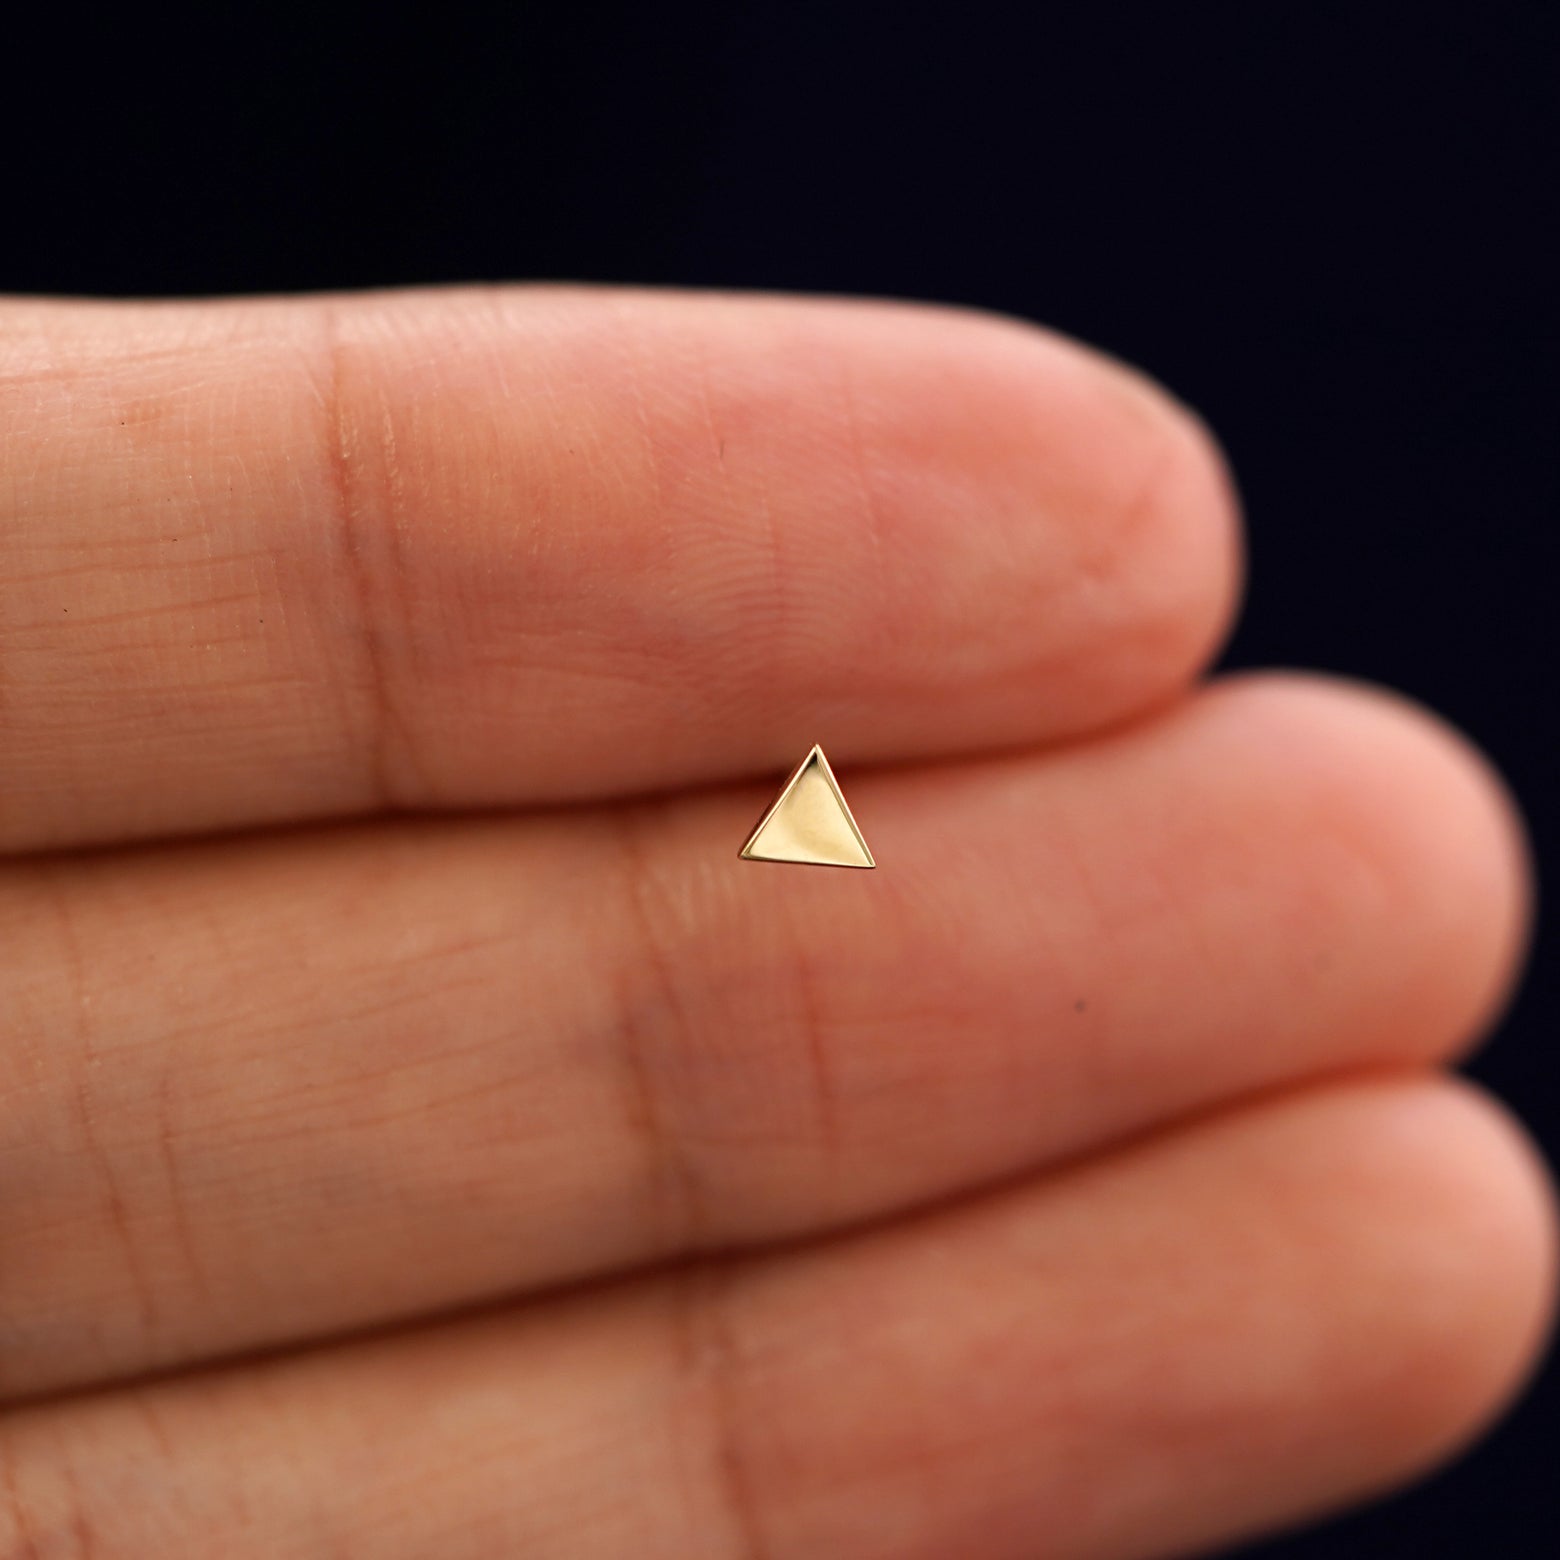 A solid 14k yellow gold Triangle Earring in between a model's fingers